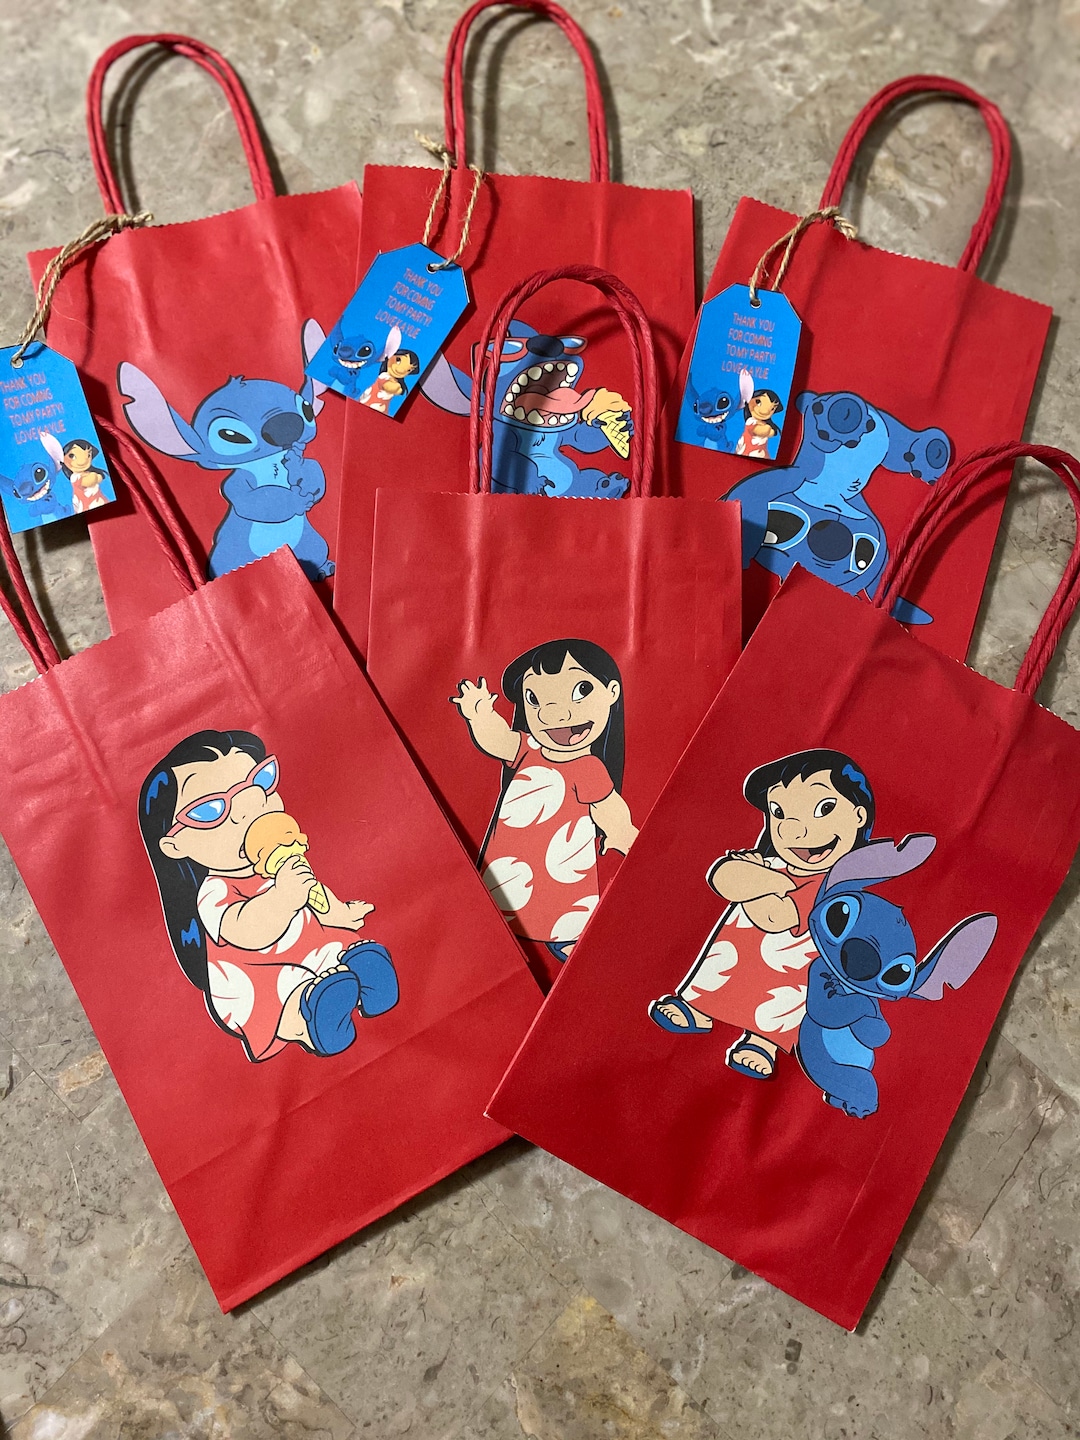 DIY Stitch goodie bags for birthday party! Cut out & glued stitch's face &  tied with…